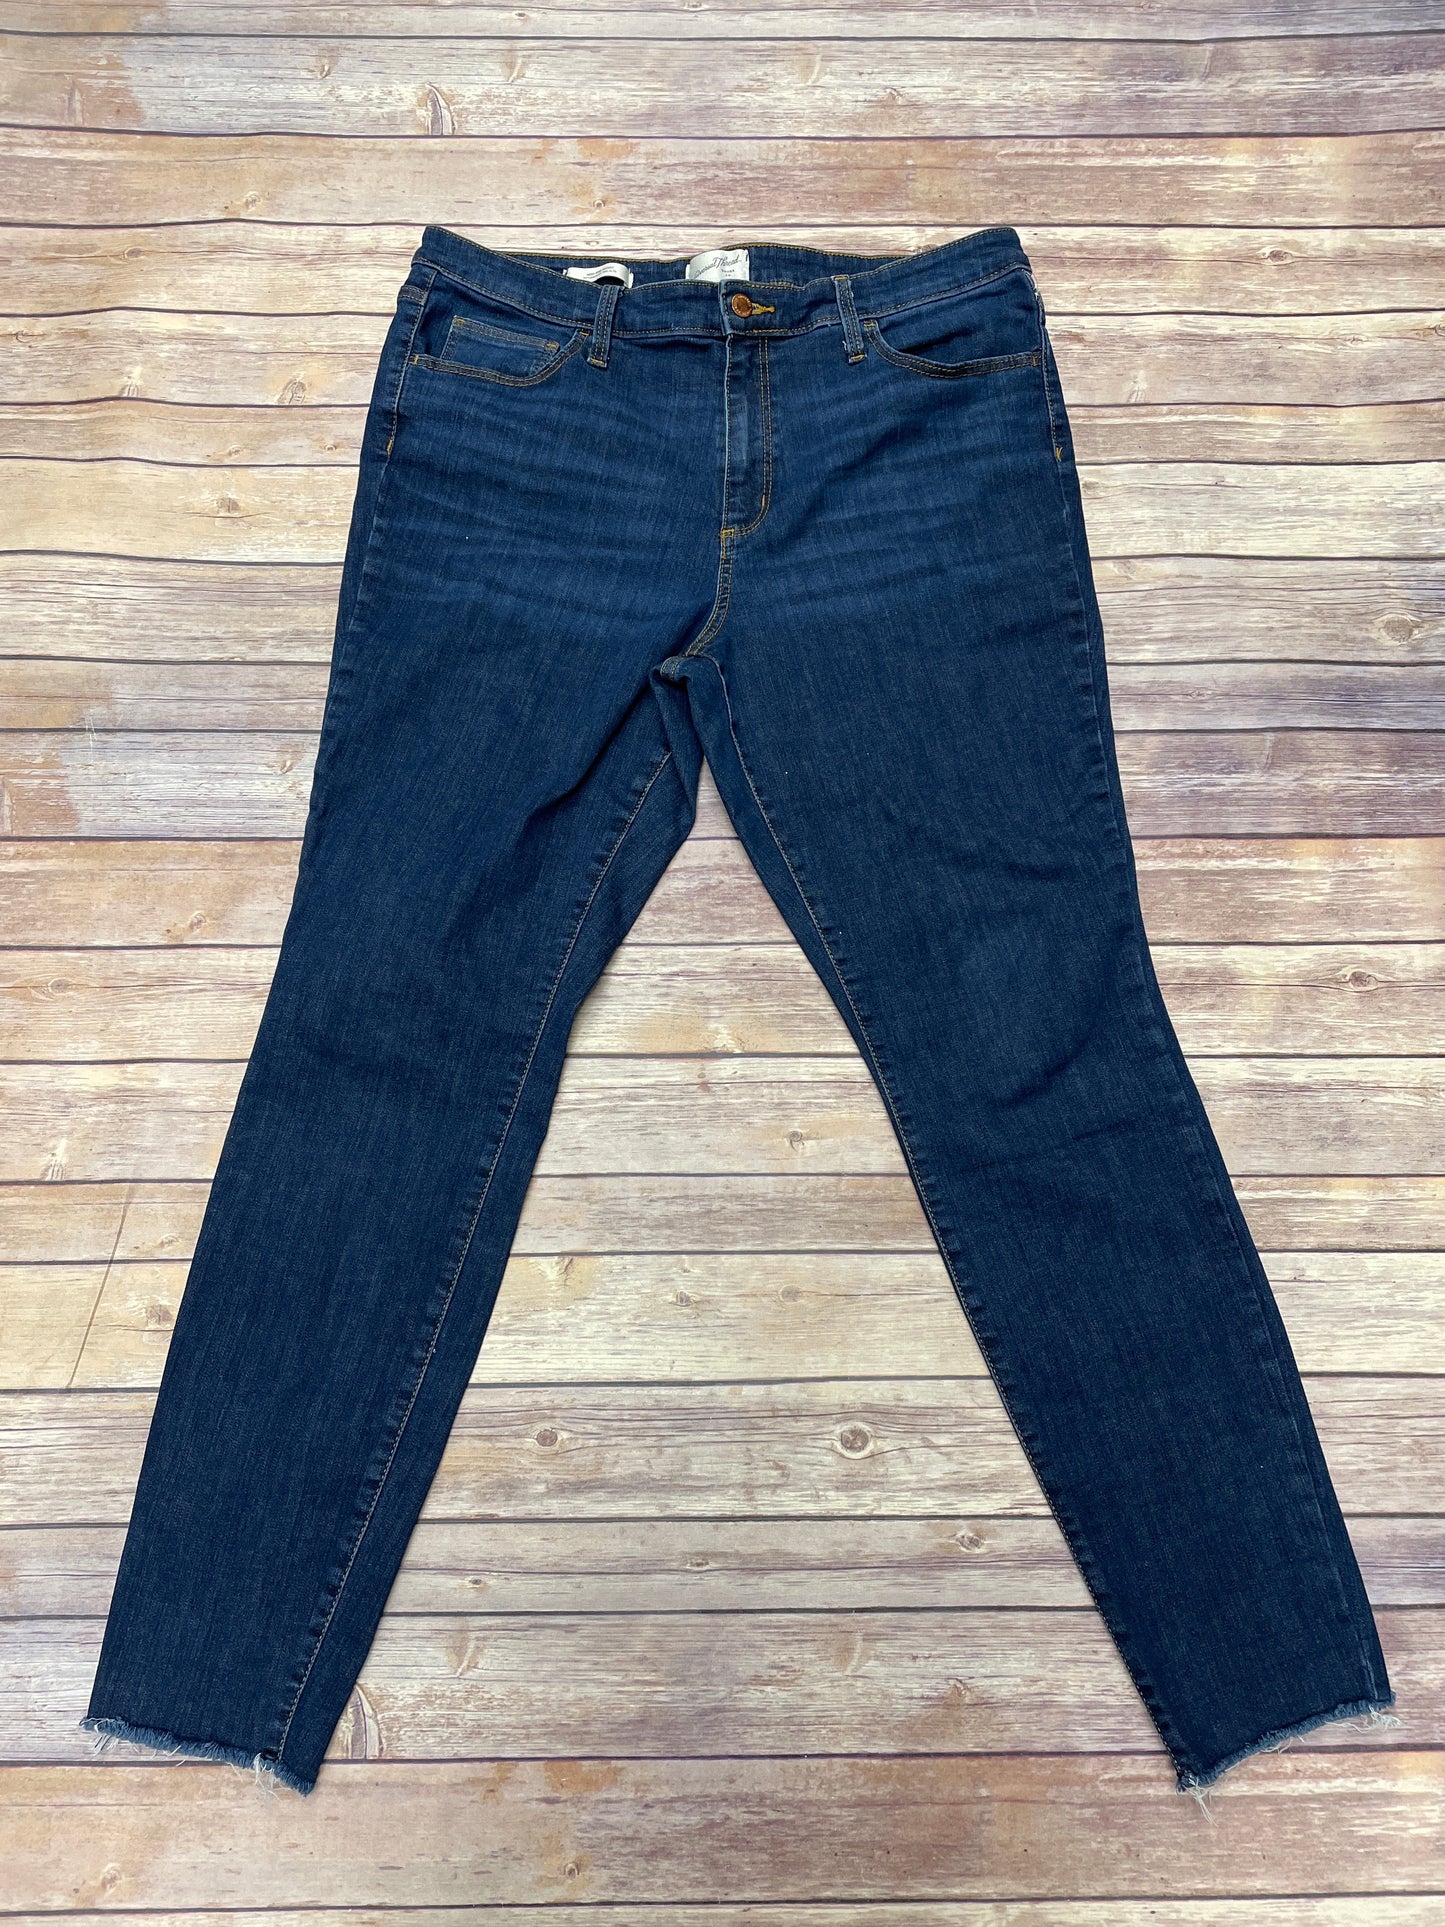 Jeans Skinny By Universal Thread  Size: 16L